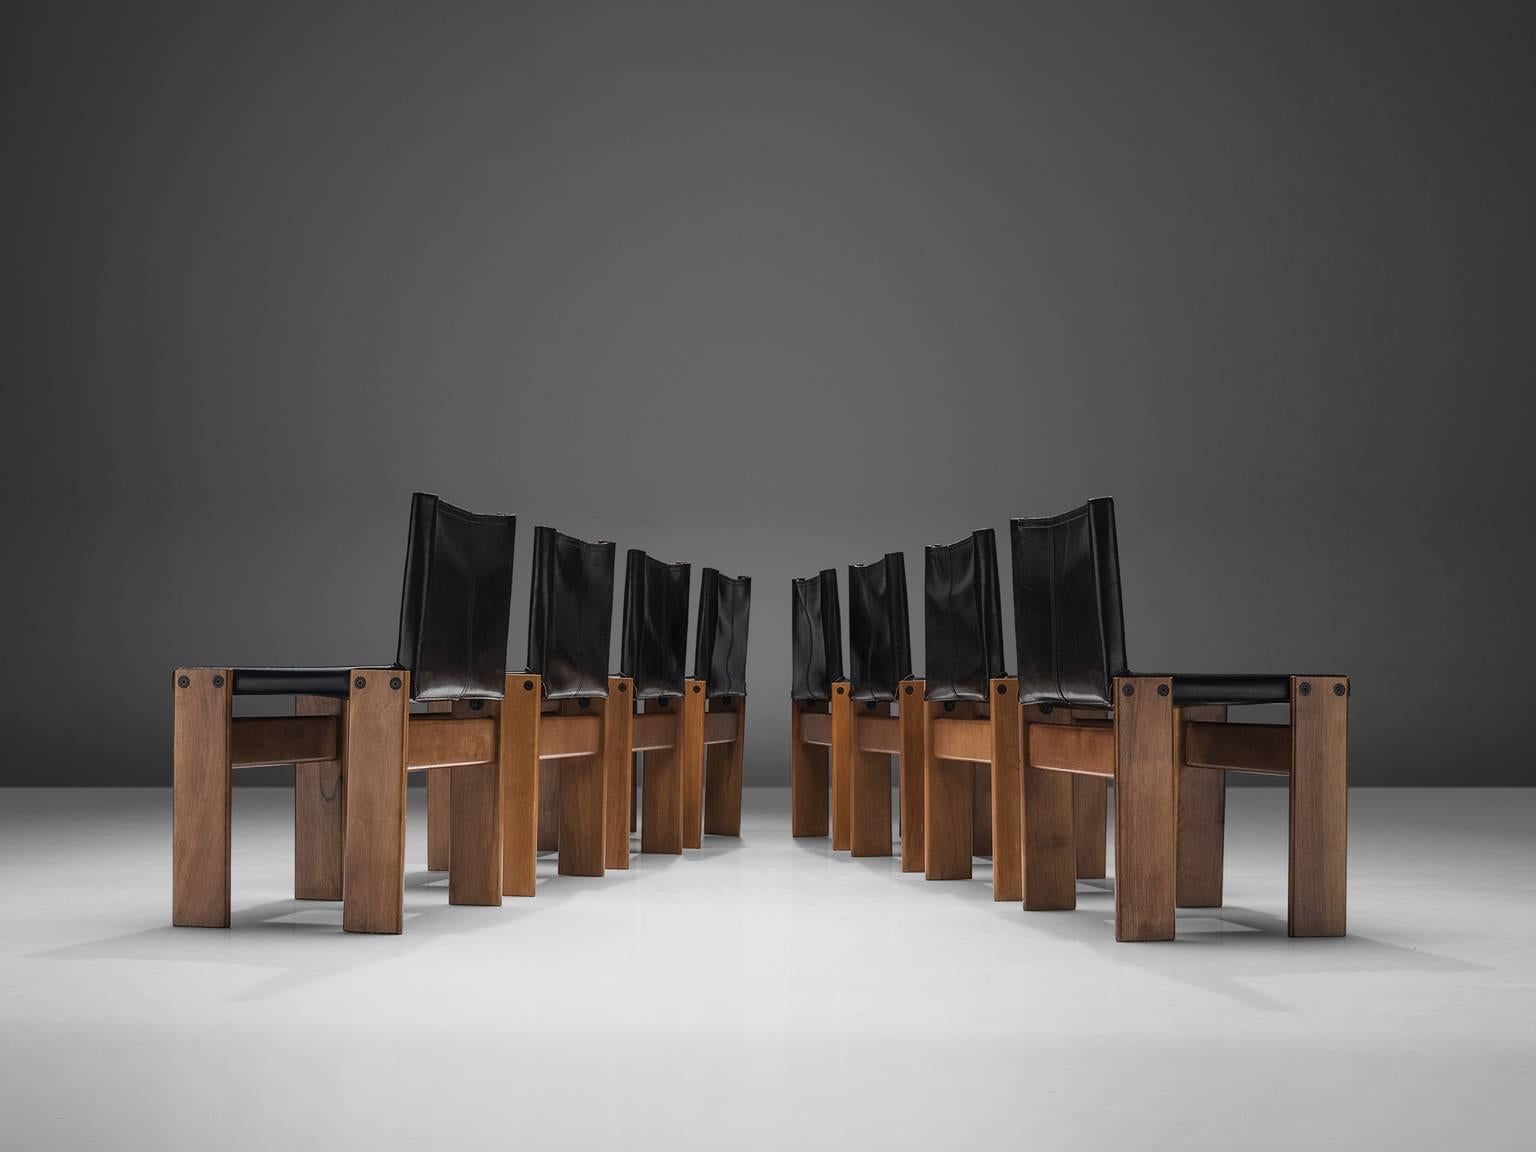 Afra & Tobia Scarpa, monk dining chairs, wood and black leather, Italy, 1974.

The wonderfully deep black leather forms a striking combination with the blond wood. Interesting is the 'flat' shape of this chair where the designer has chosen to